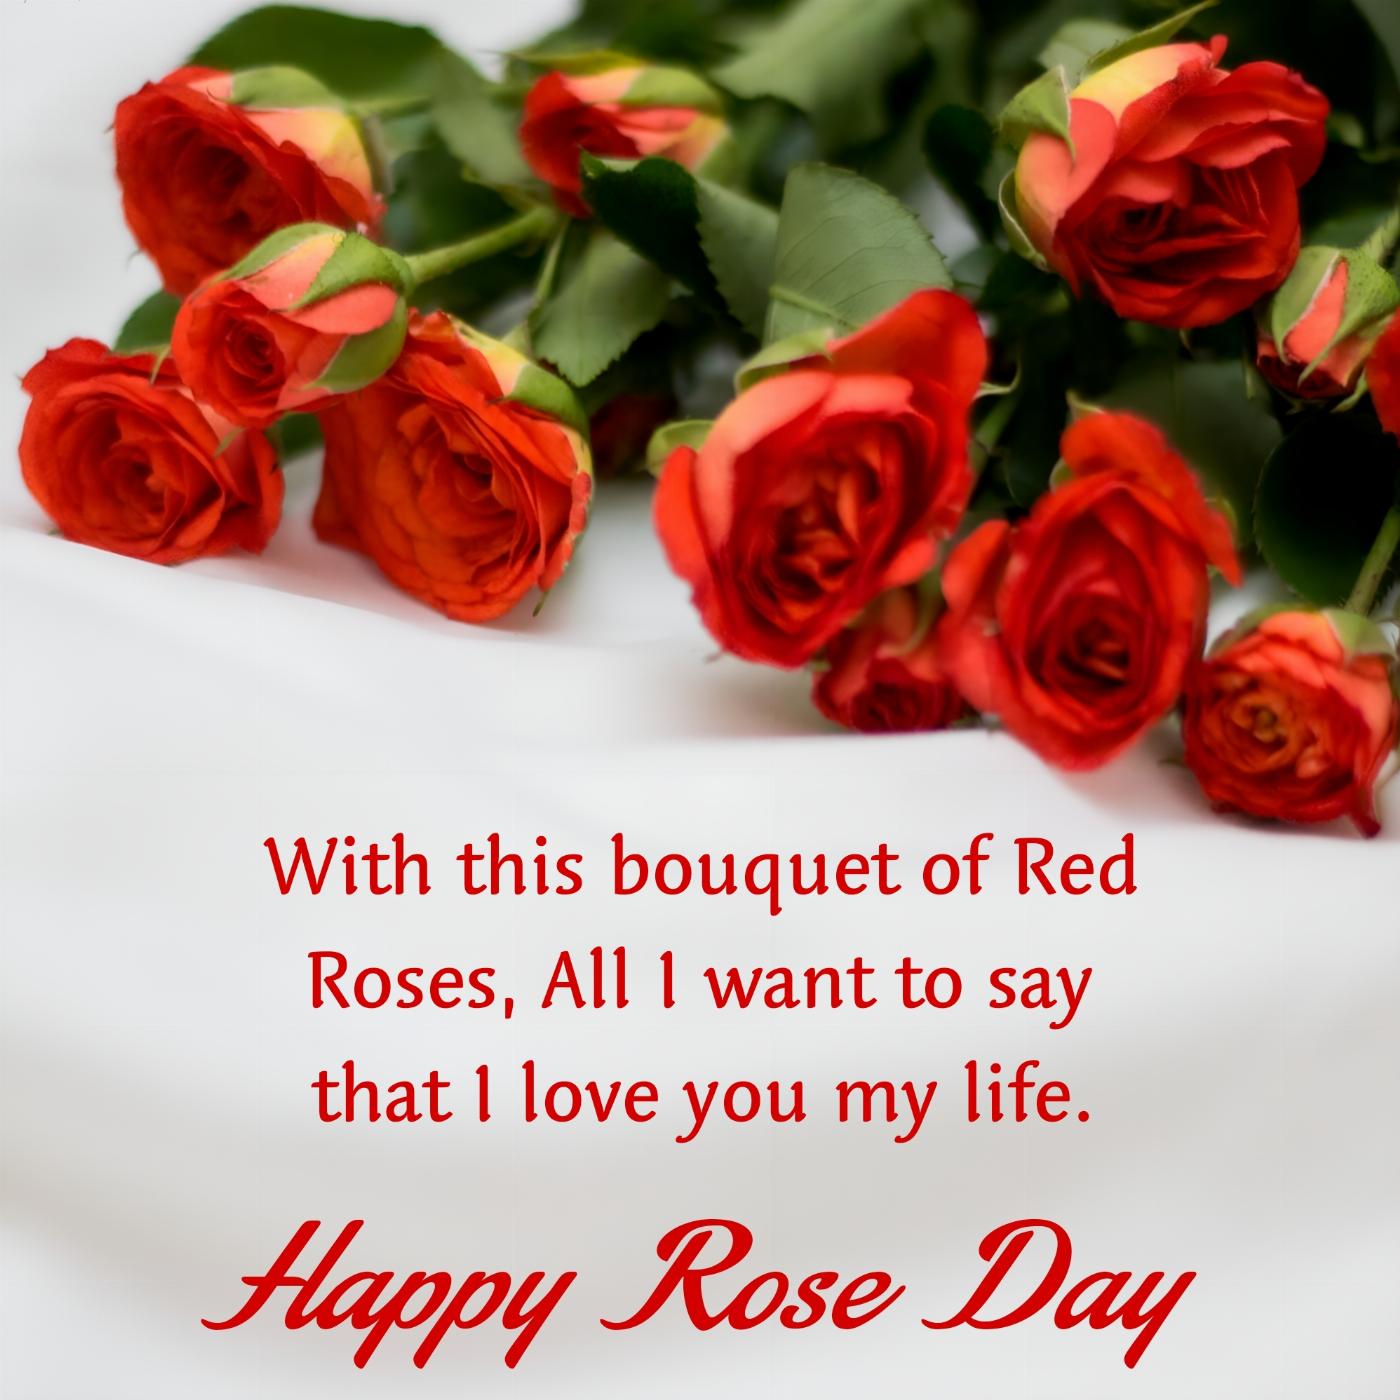 With this bouquet of Red Roses All I want to say that